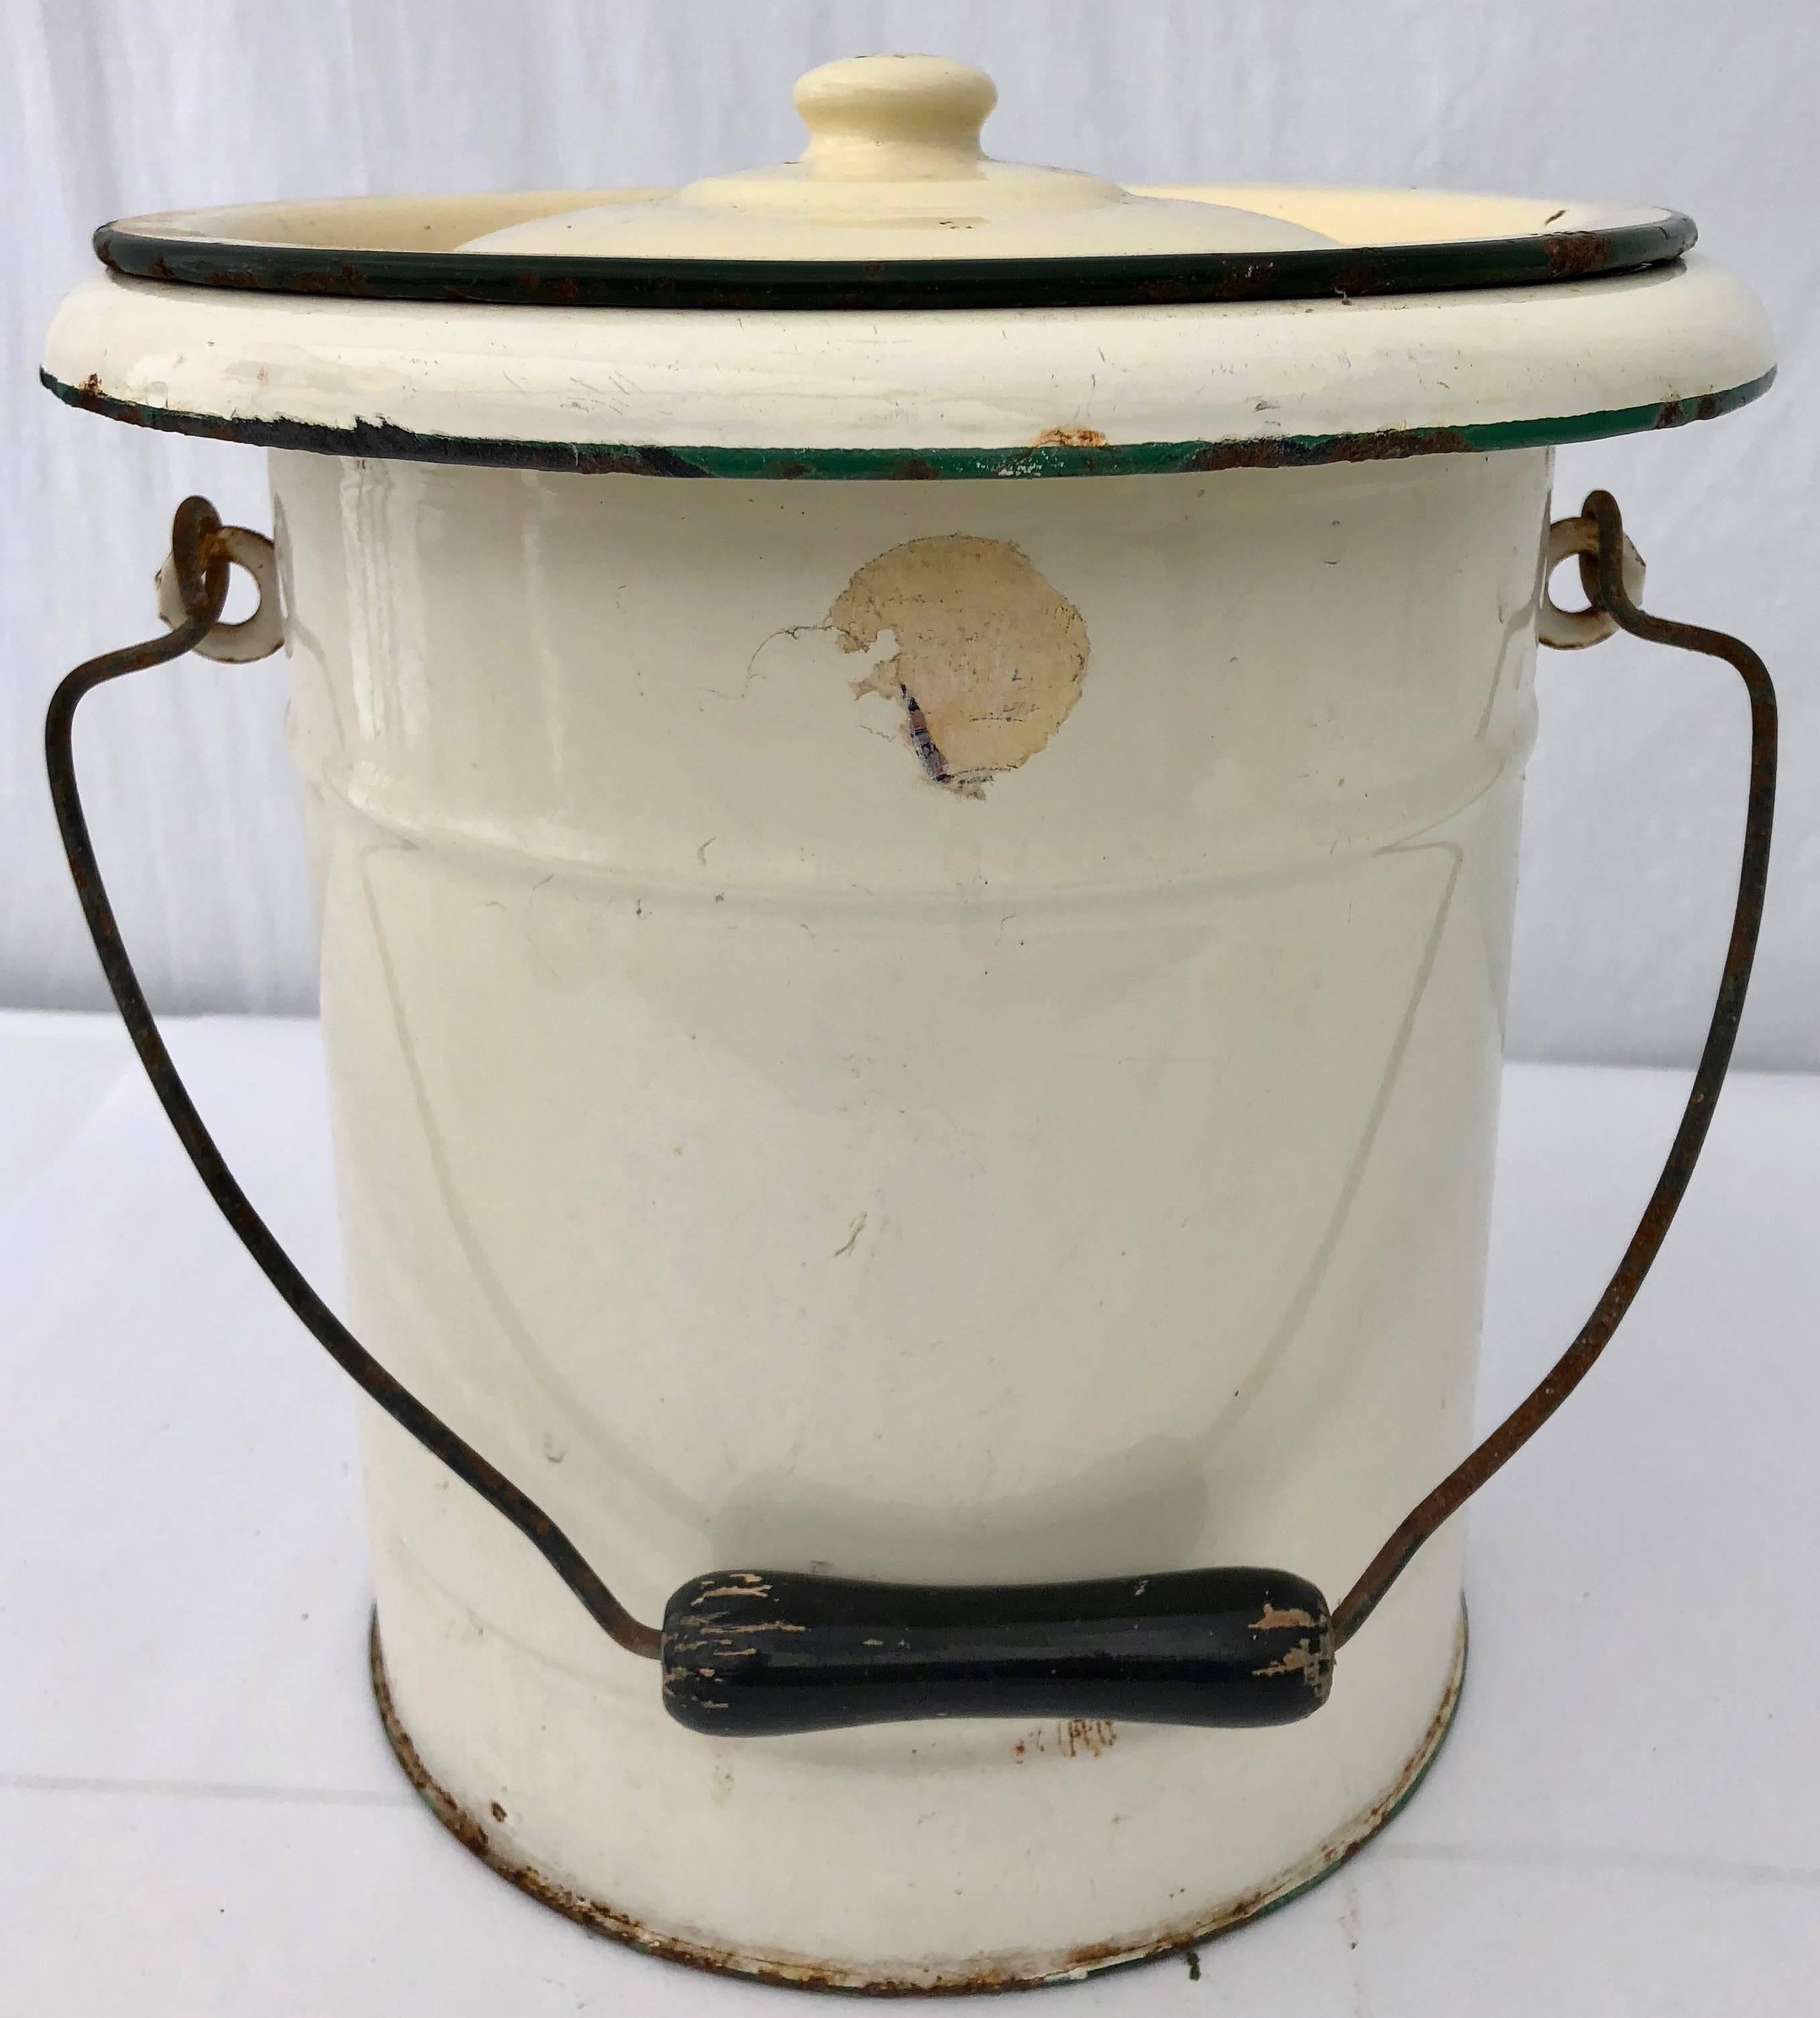 French enamelware tall cooking pot with lid, 1 articulated handle, yellow eggshell color. This piece would add a wonderful French touch to any room- add fresh cut flowers or place in a bathroom filled with clean rolled towels or use as a very unique